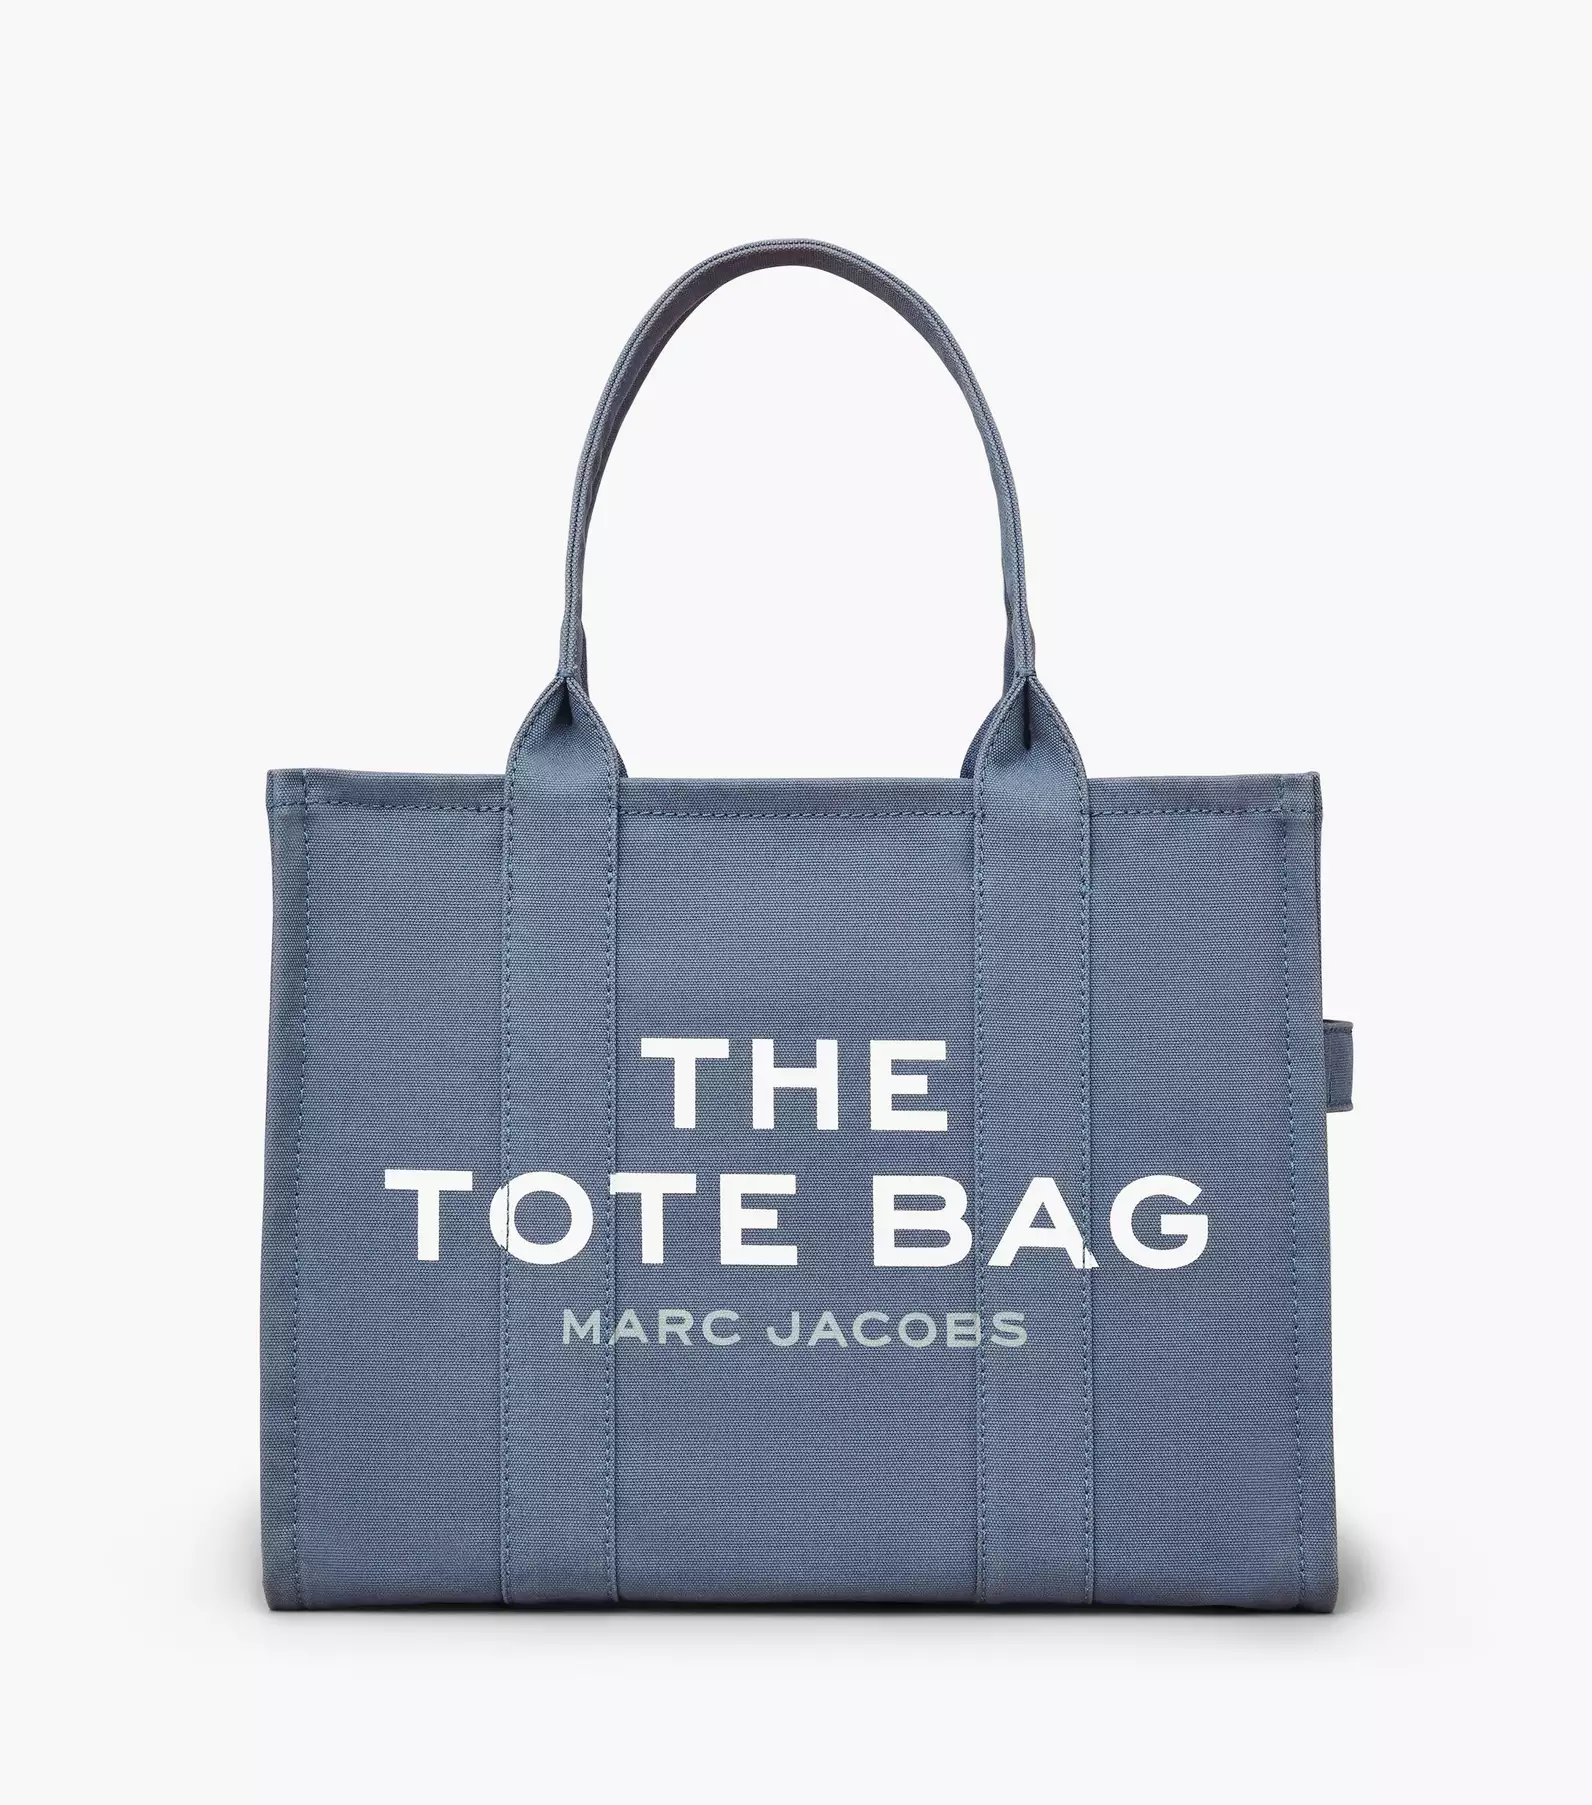 The Large Tote Bag(The Tote Bag)